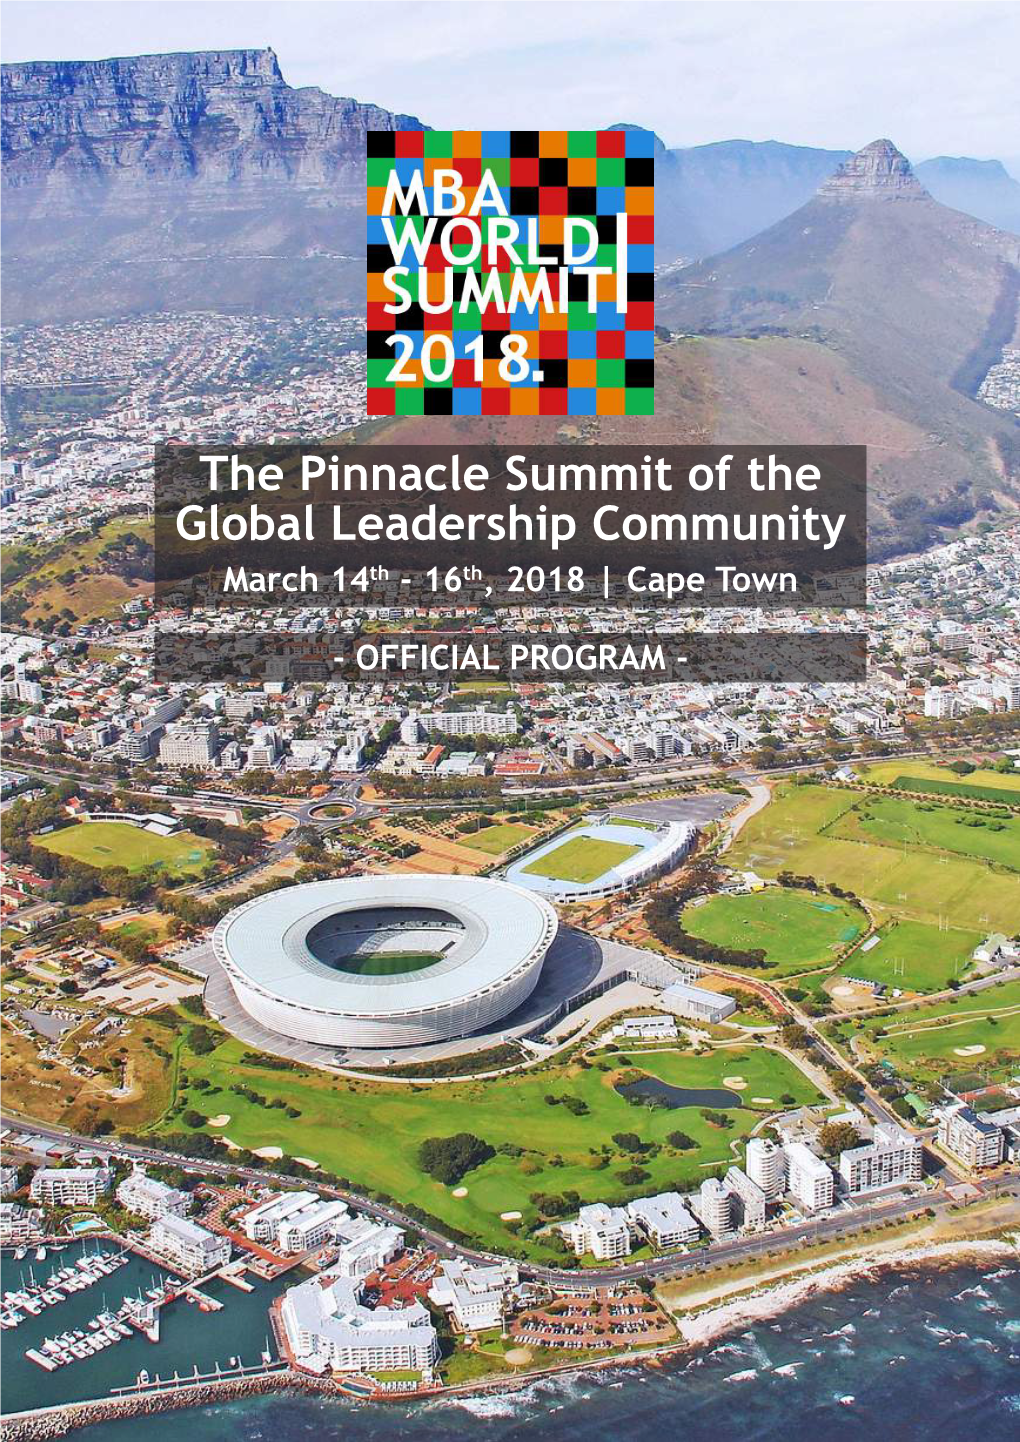 The Pinnacle Summit of the Global Leadership Community March 14Th - 16Th, 2018 | Cape Town